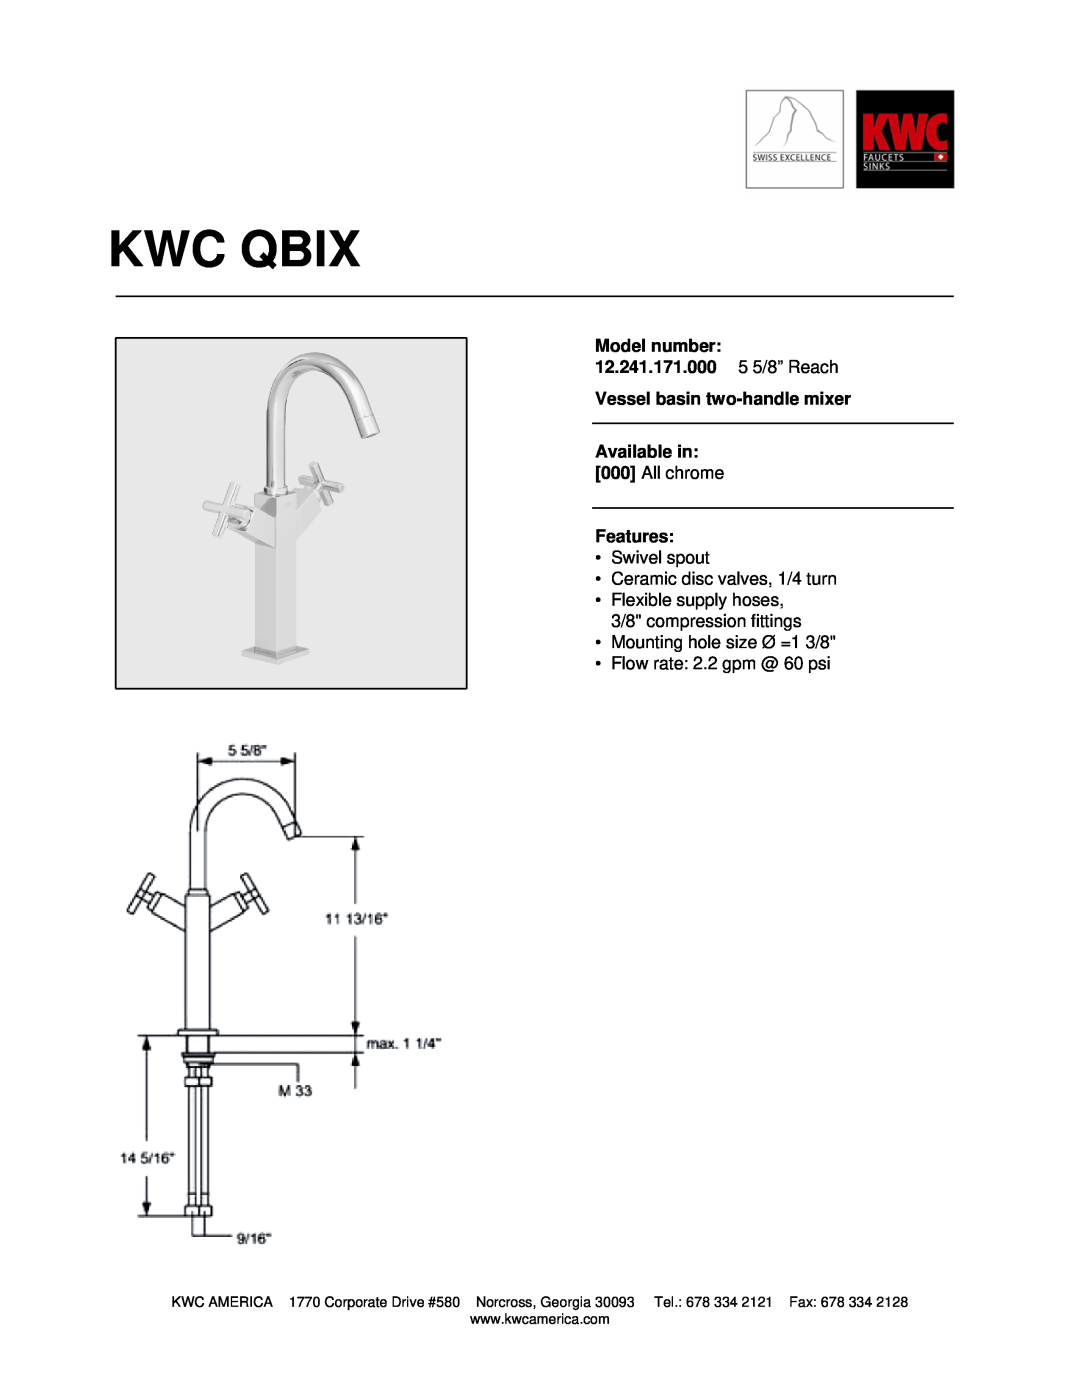 KWC manual Kwc Qbix, Model number 12.241.171.000 5 5/8” Reach, Vessel basin two-handlemixer Available in, All chrome 